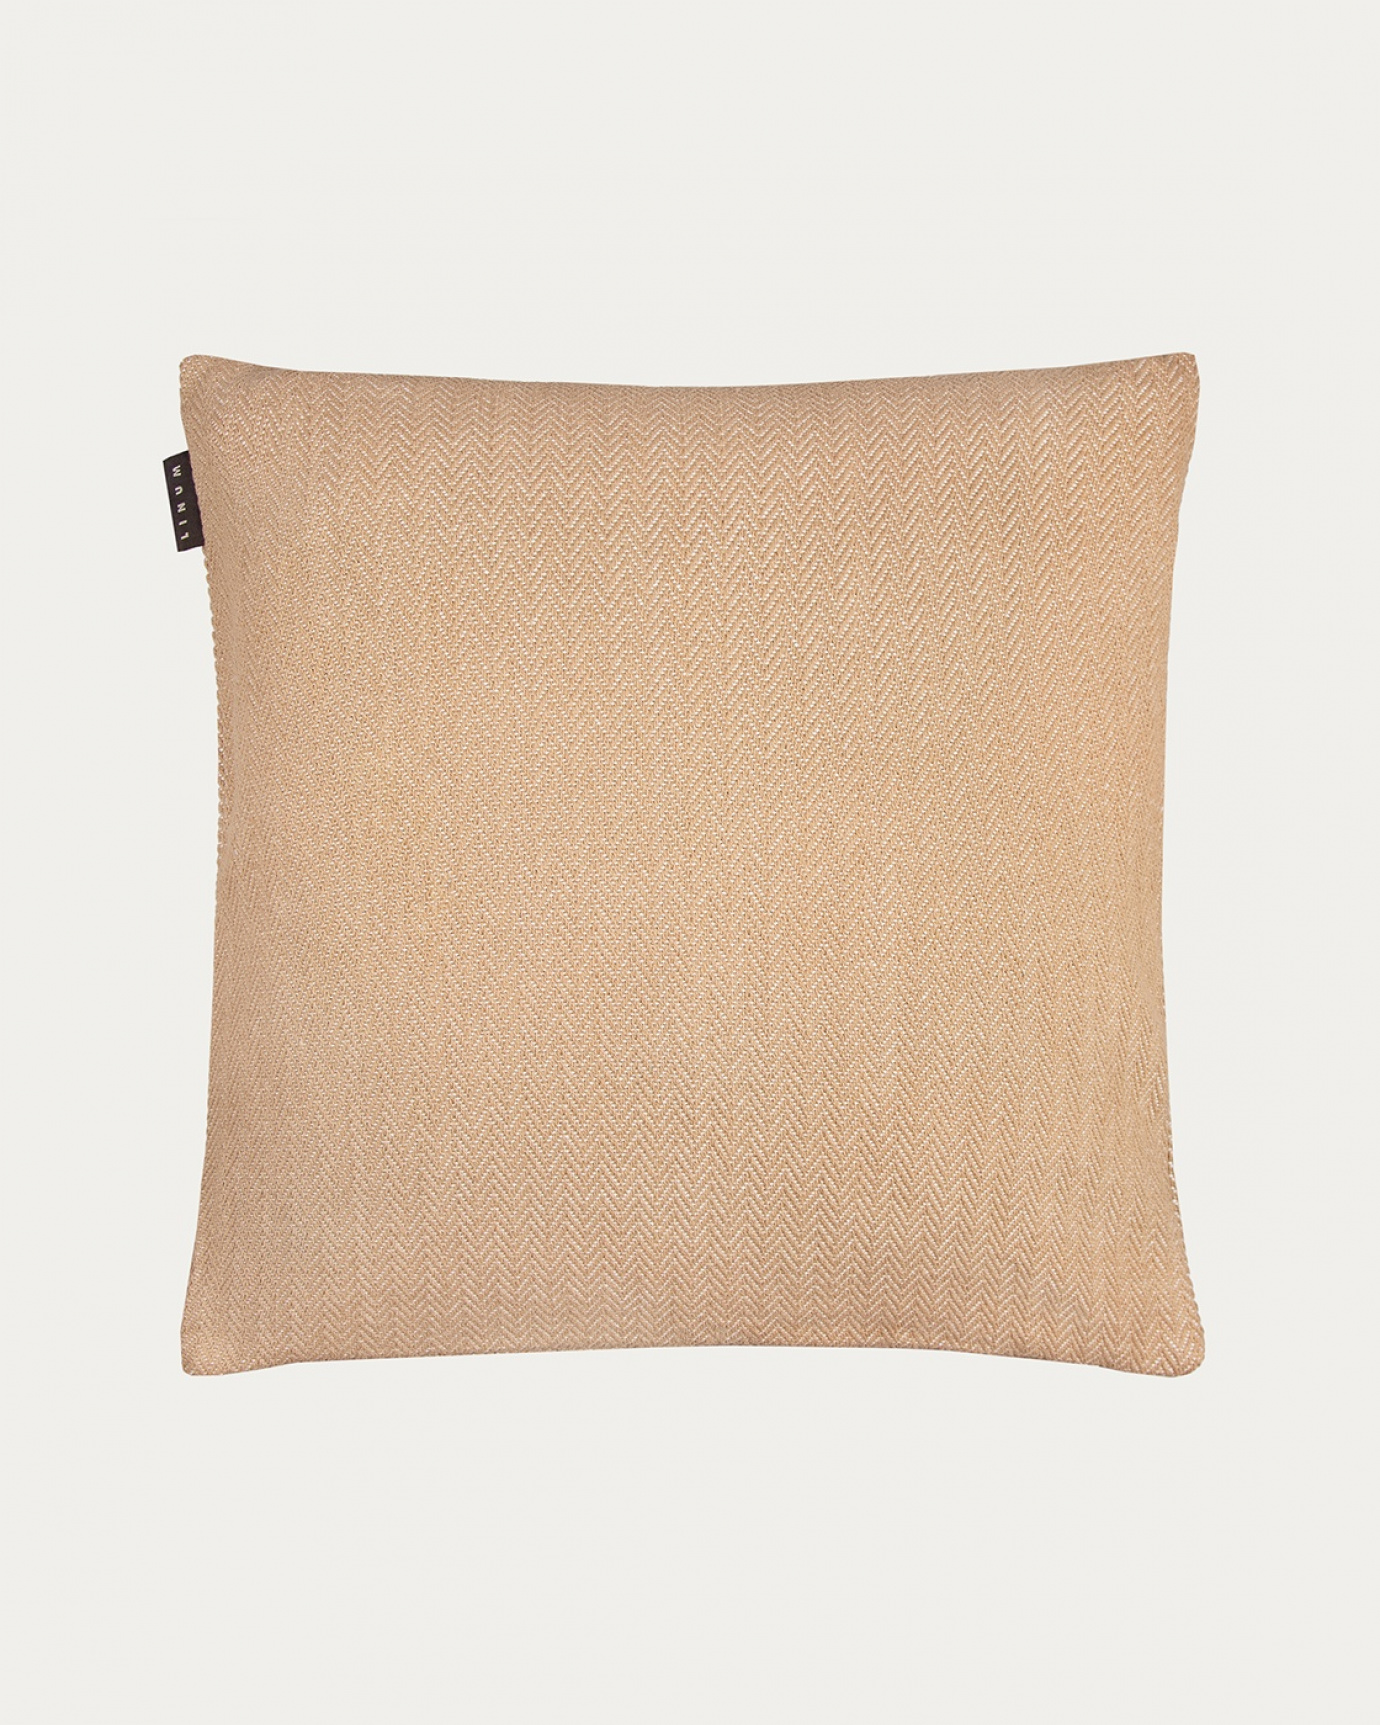 Product image camel brown SHEPARD cushion cover made of soft cotton with a discreet herringbone pattern from LINUM DESIGN. Size 50x50 cm.